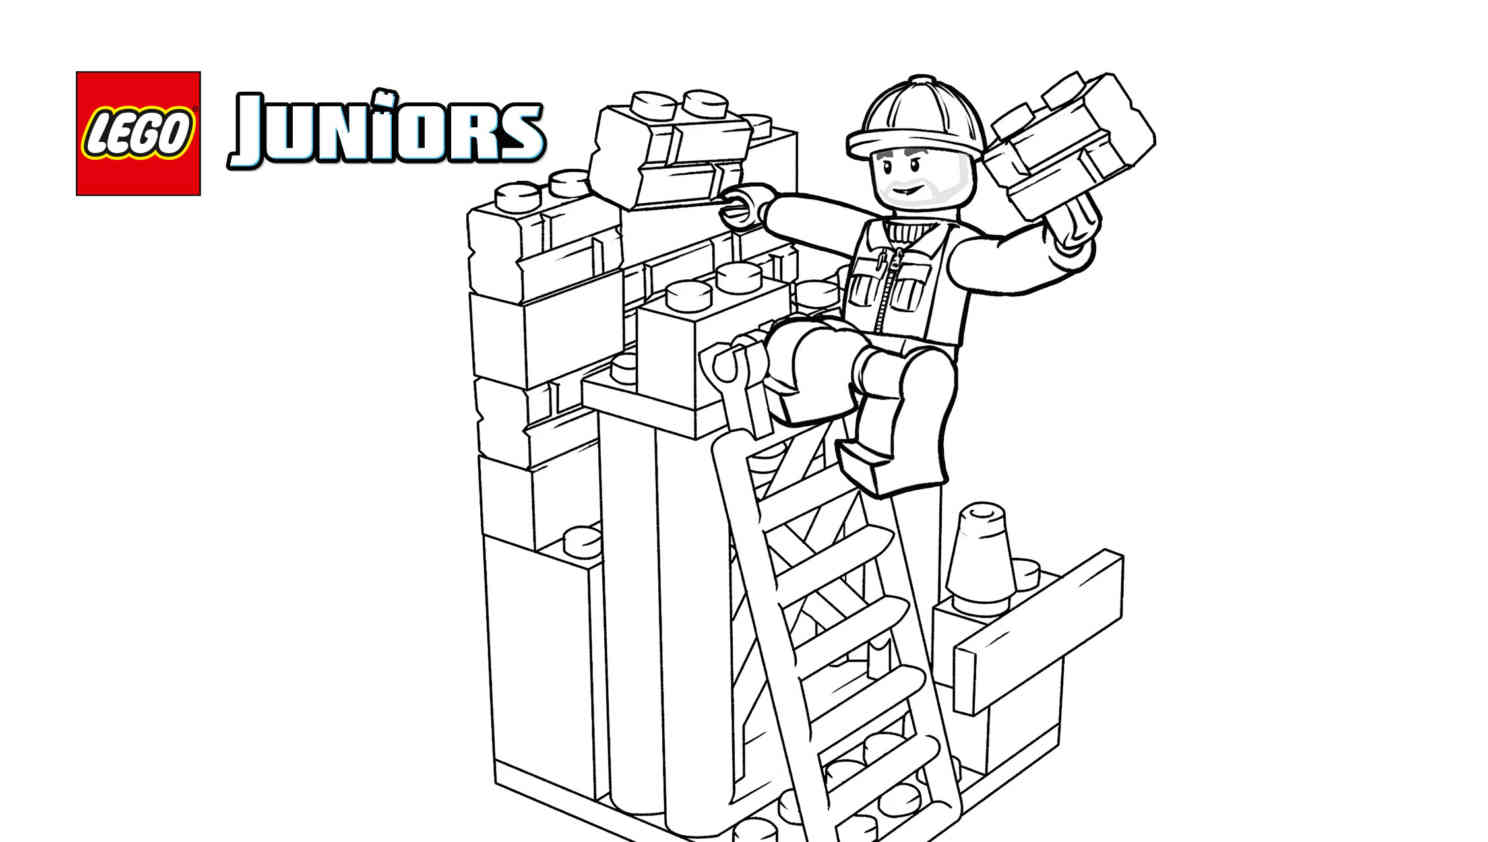 Bionicles - Coloring Pages for Kids and for Adults